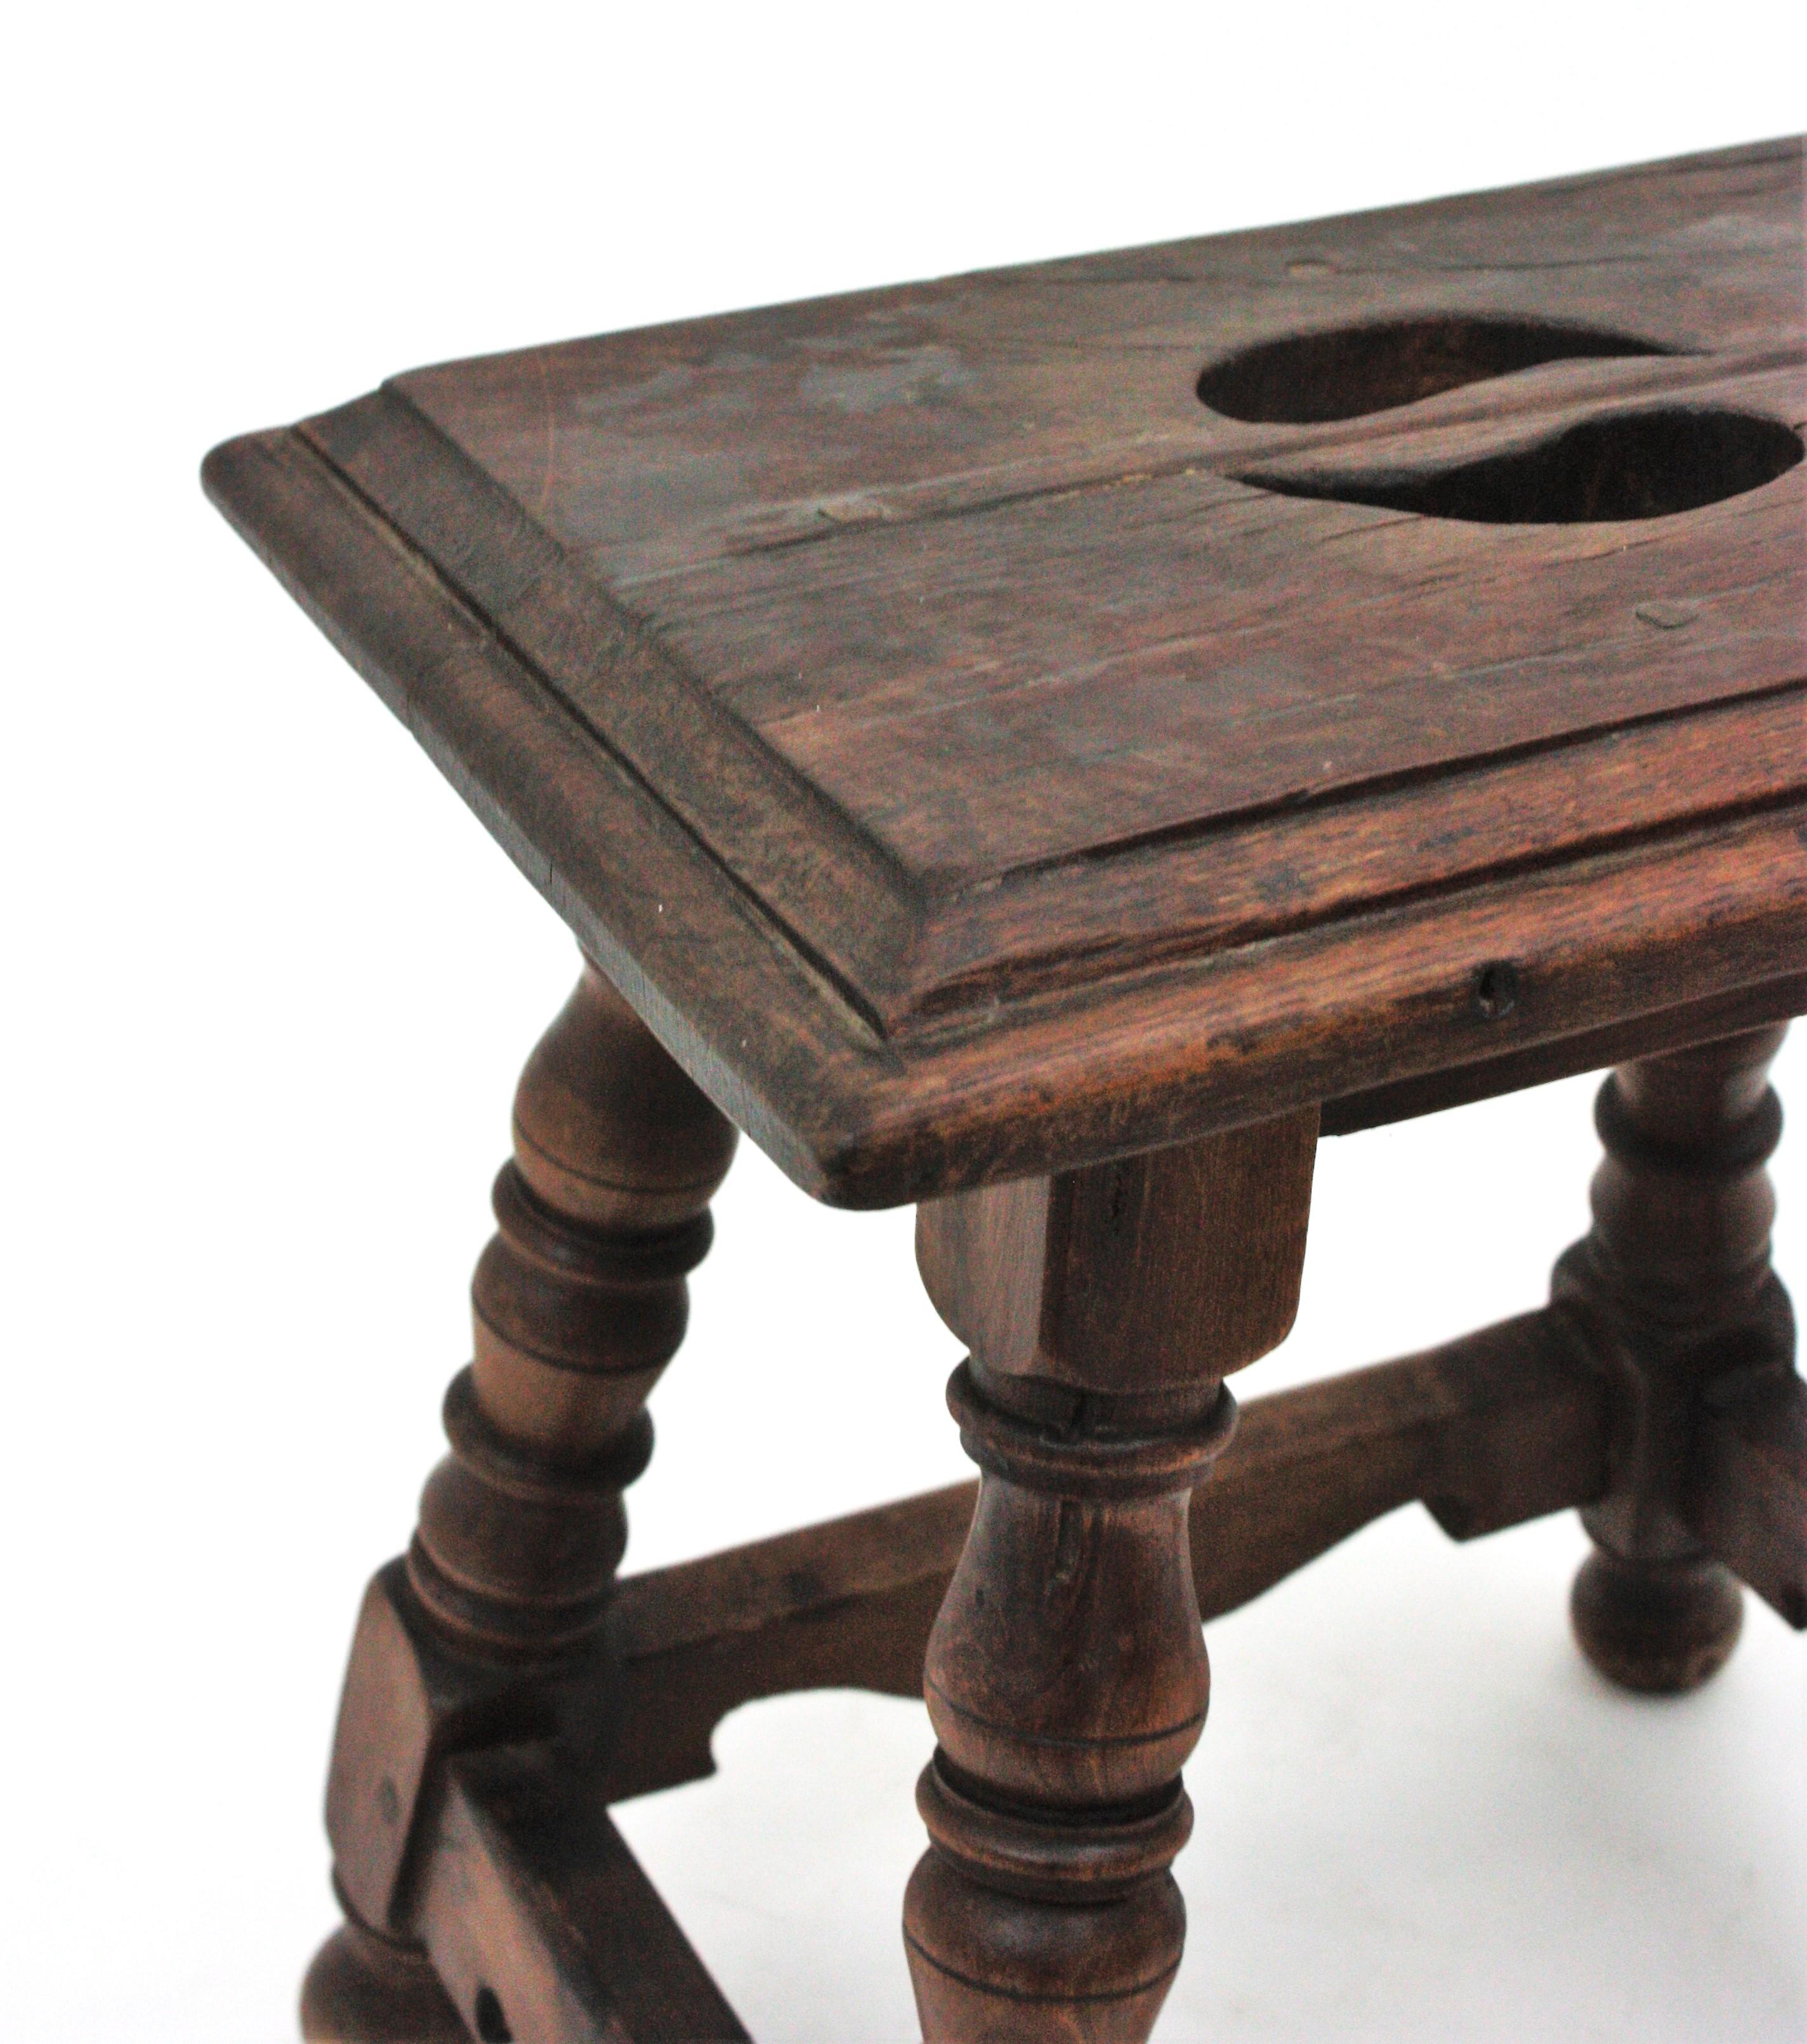 Pair of Spanish Colonial Side Tables / Stools in Carved Wood, 1940s For Sale 8